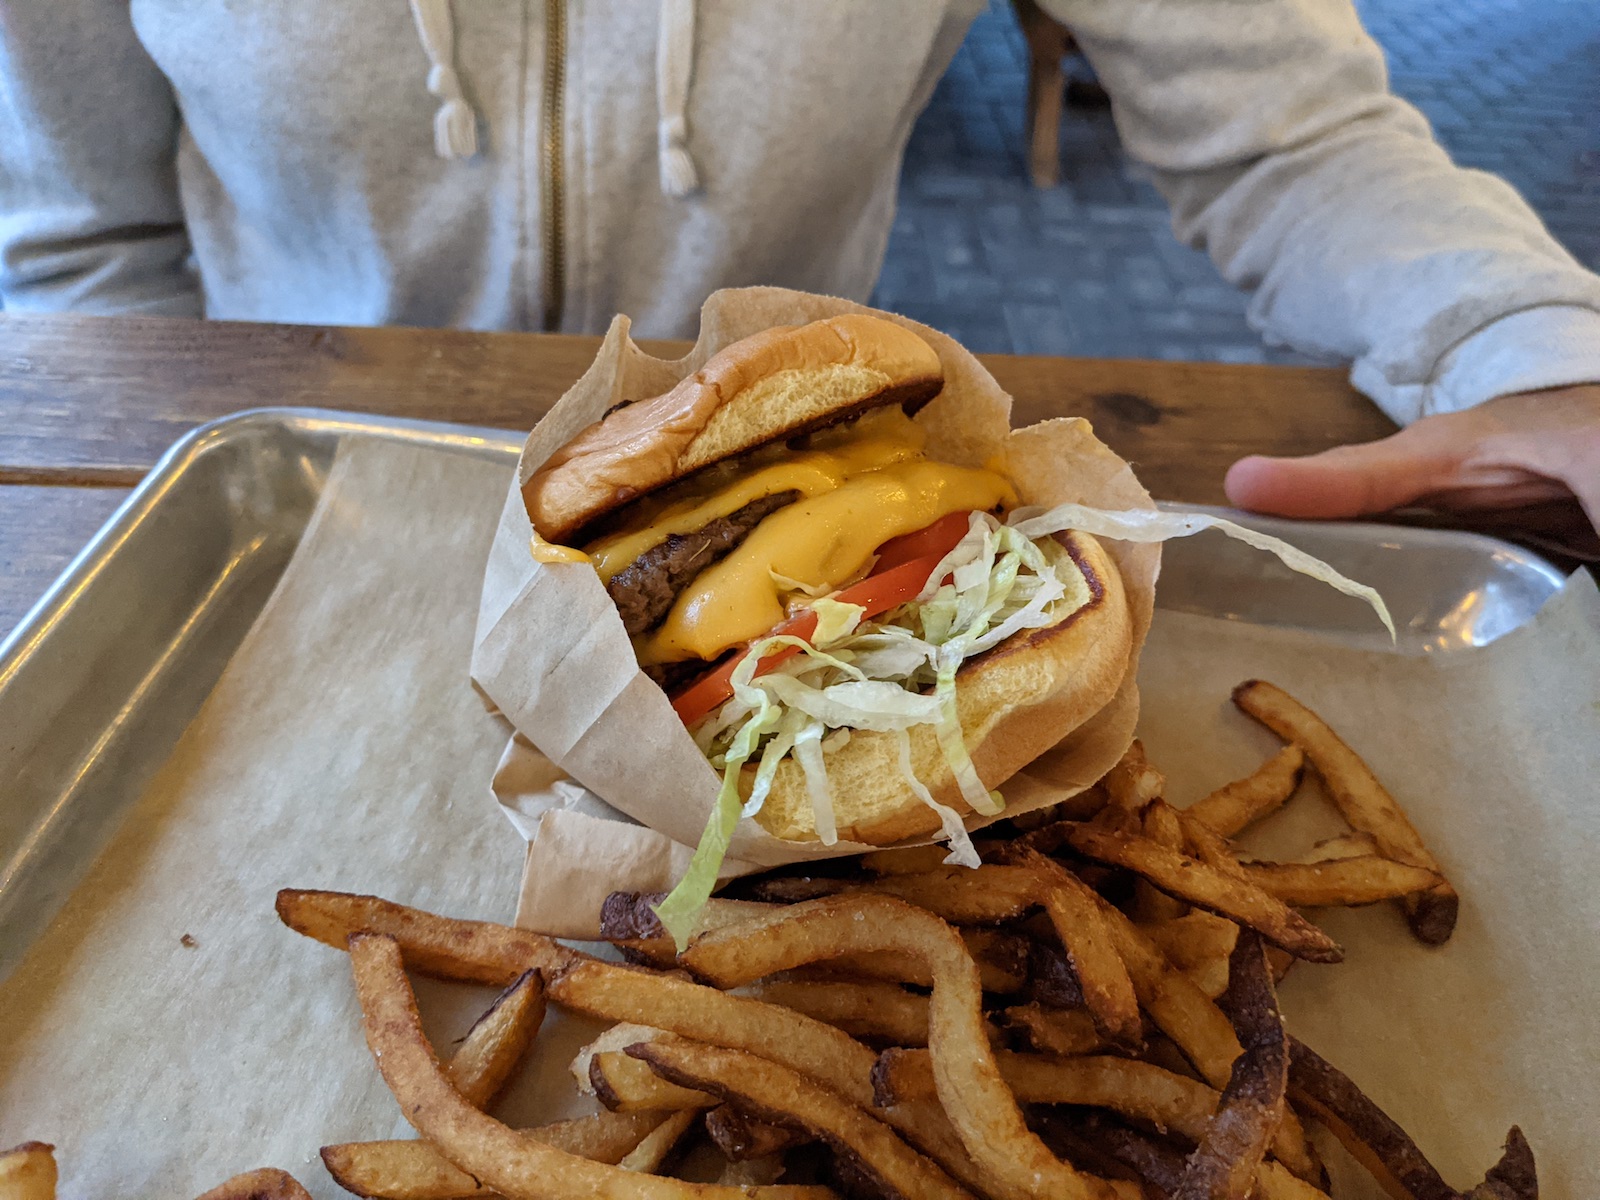 A double patty cheeseburger with a slice of tomato and shredded lettuce is served on a silver tray with a layer of brown paper on the bottom. Fries are on top of the paper and so is the burger which is also enclosed in a tight brown paper bag. A hand rests on the tray which sits on a wooden picnic table.